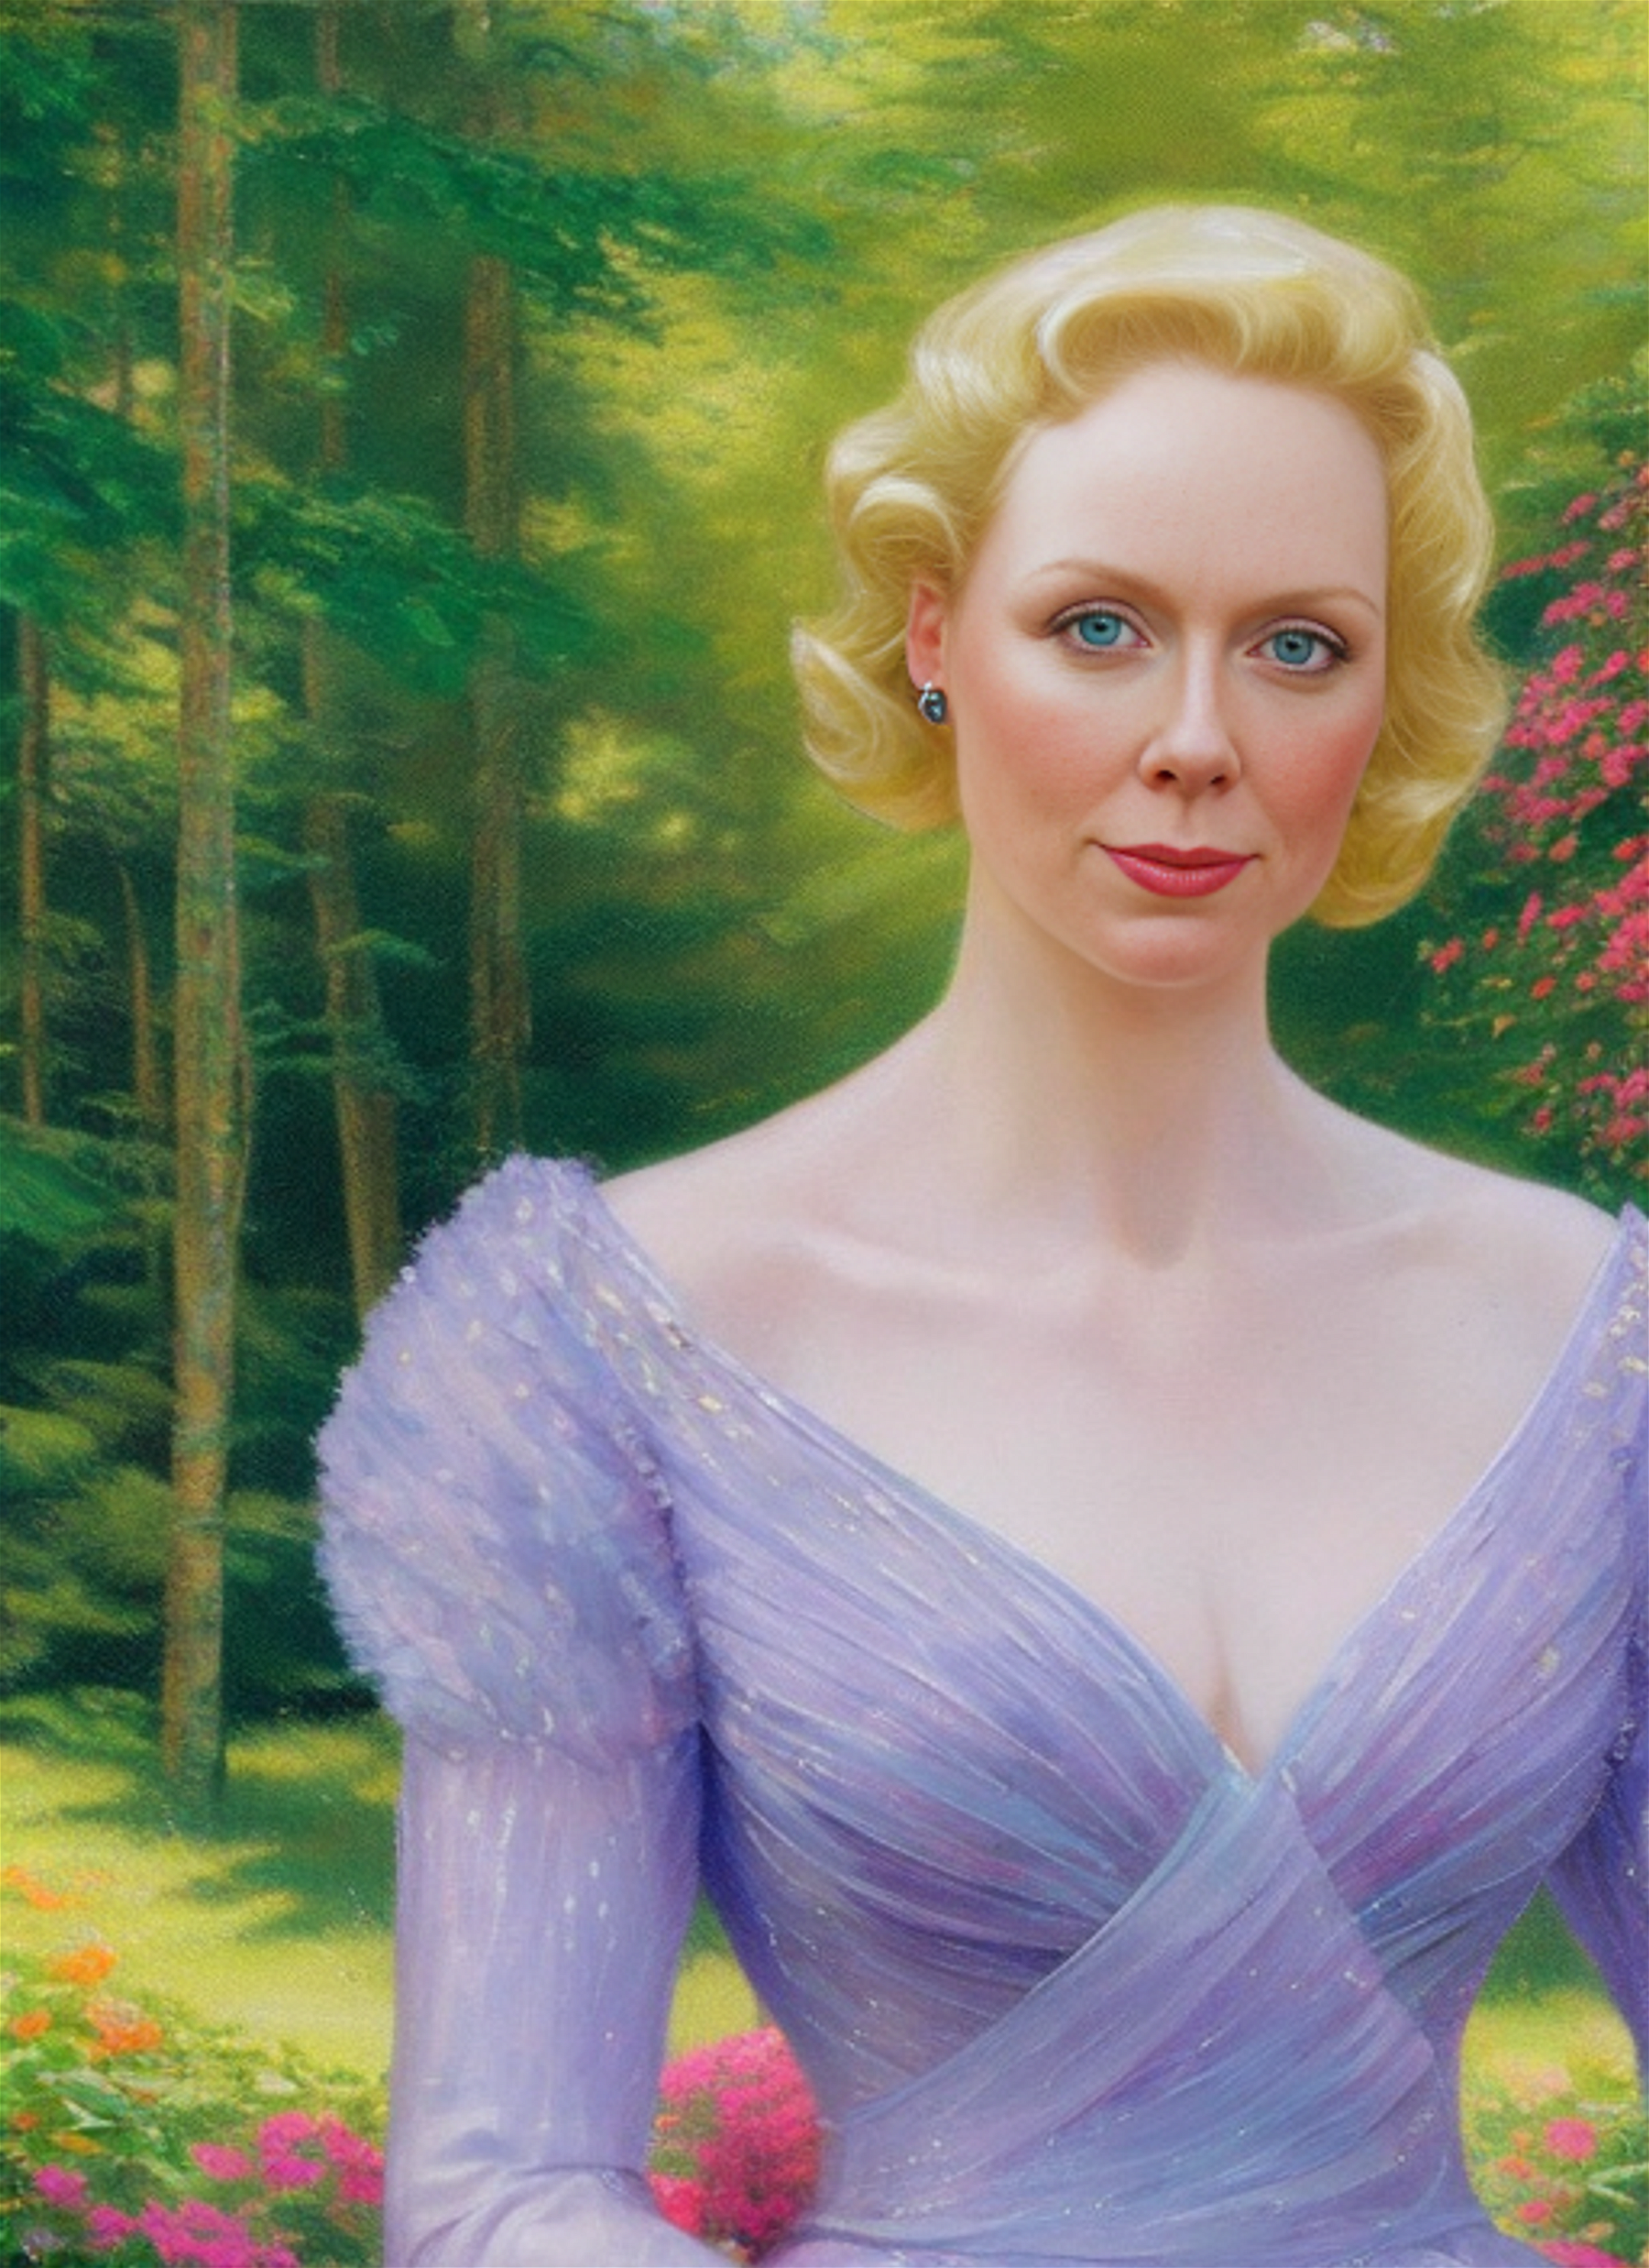 A realistic full body portrait of Gwendoline Christie with a soft and serene expression, in a natural and idyllic setting, inspired by the work of Bob Ross and Thomas Kinkade, with a harmonious color scheme and delicate brushstrokes.